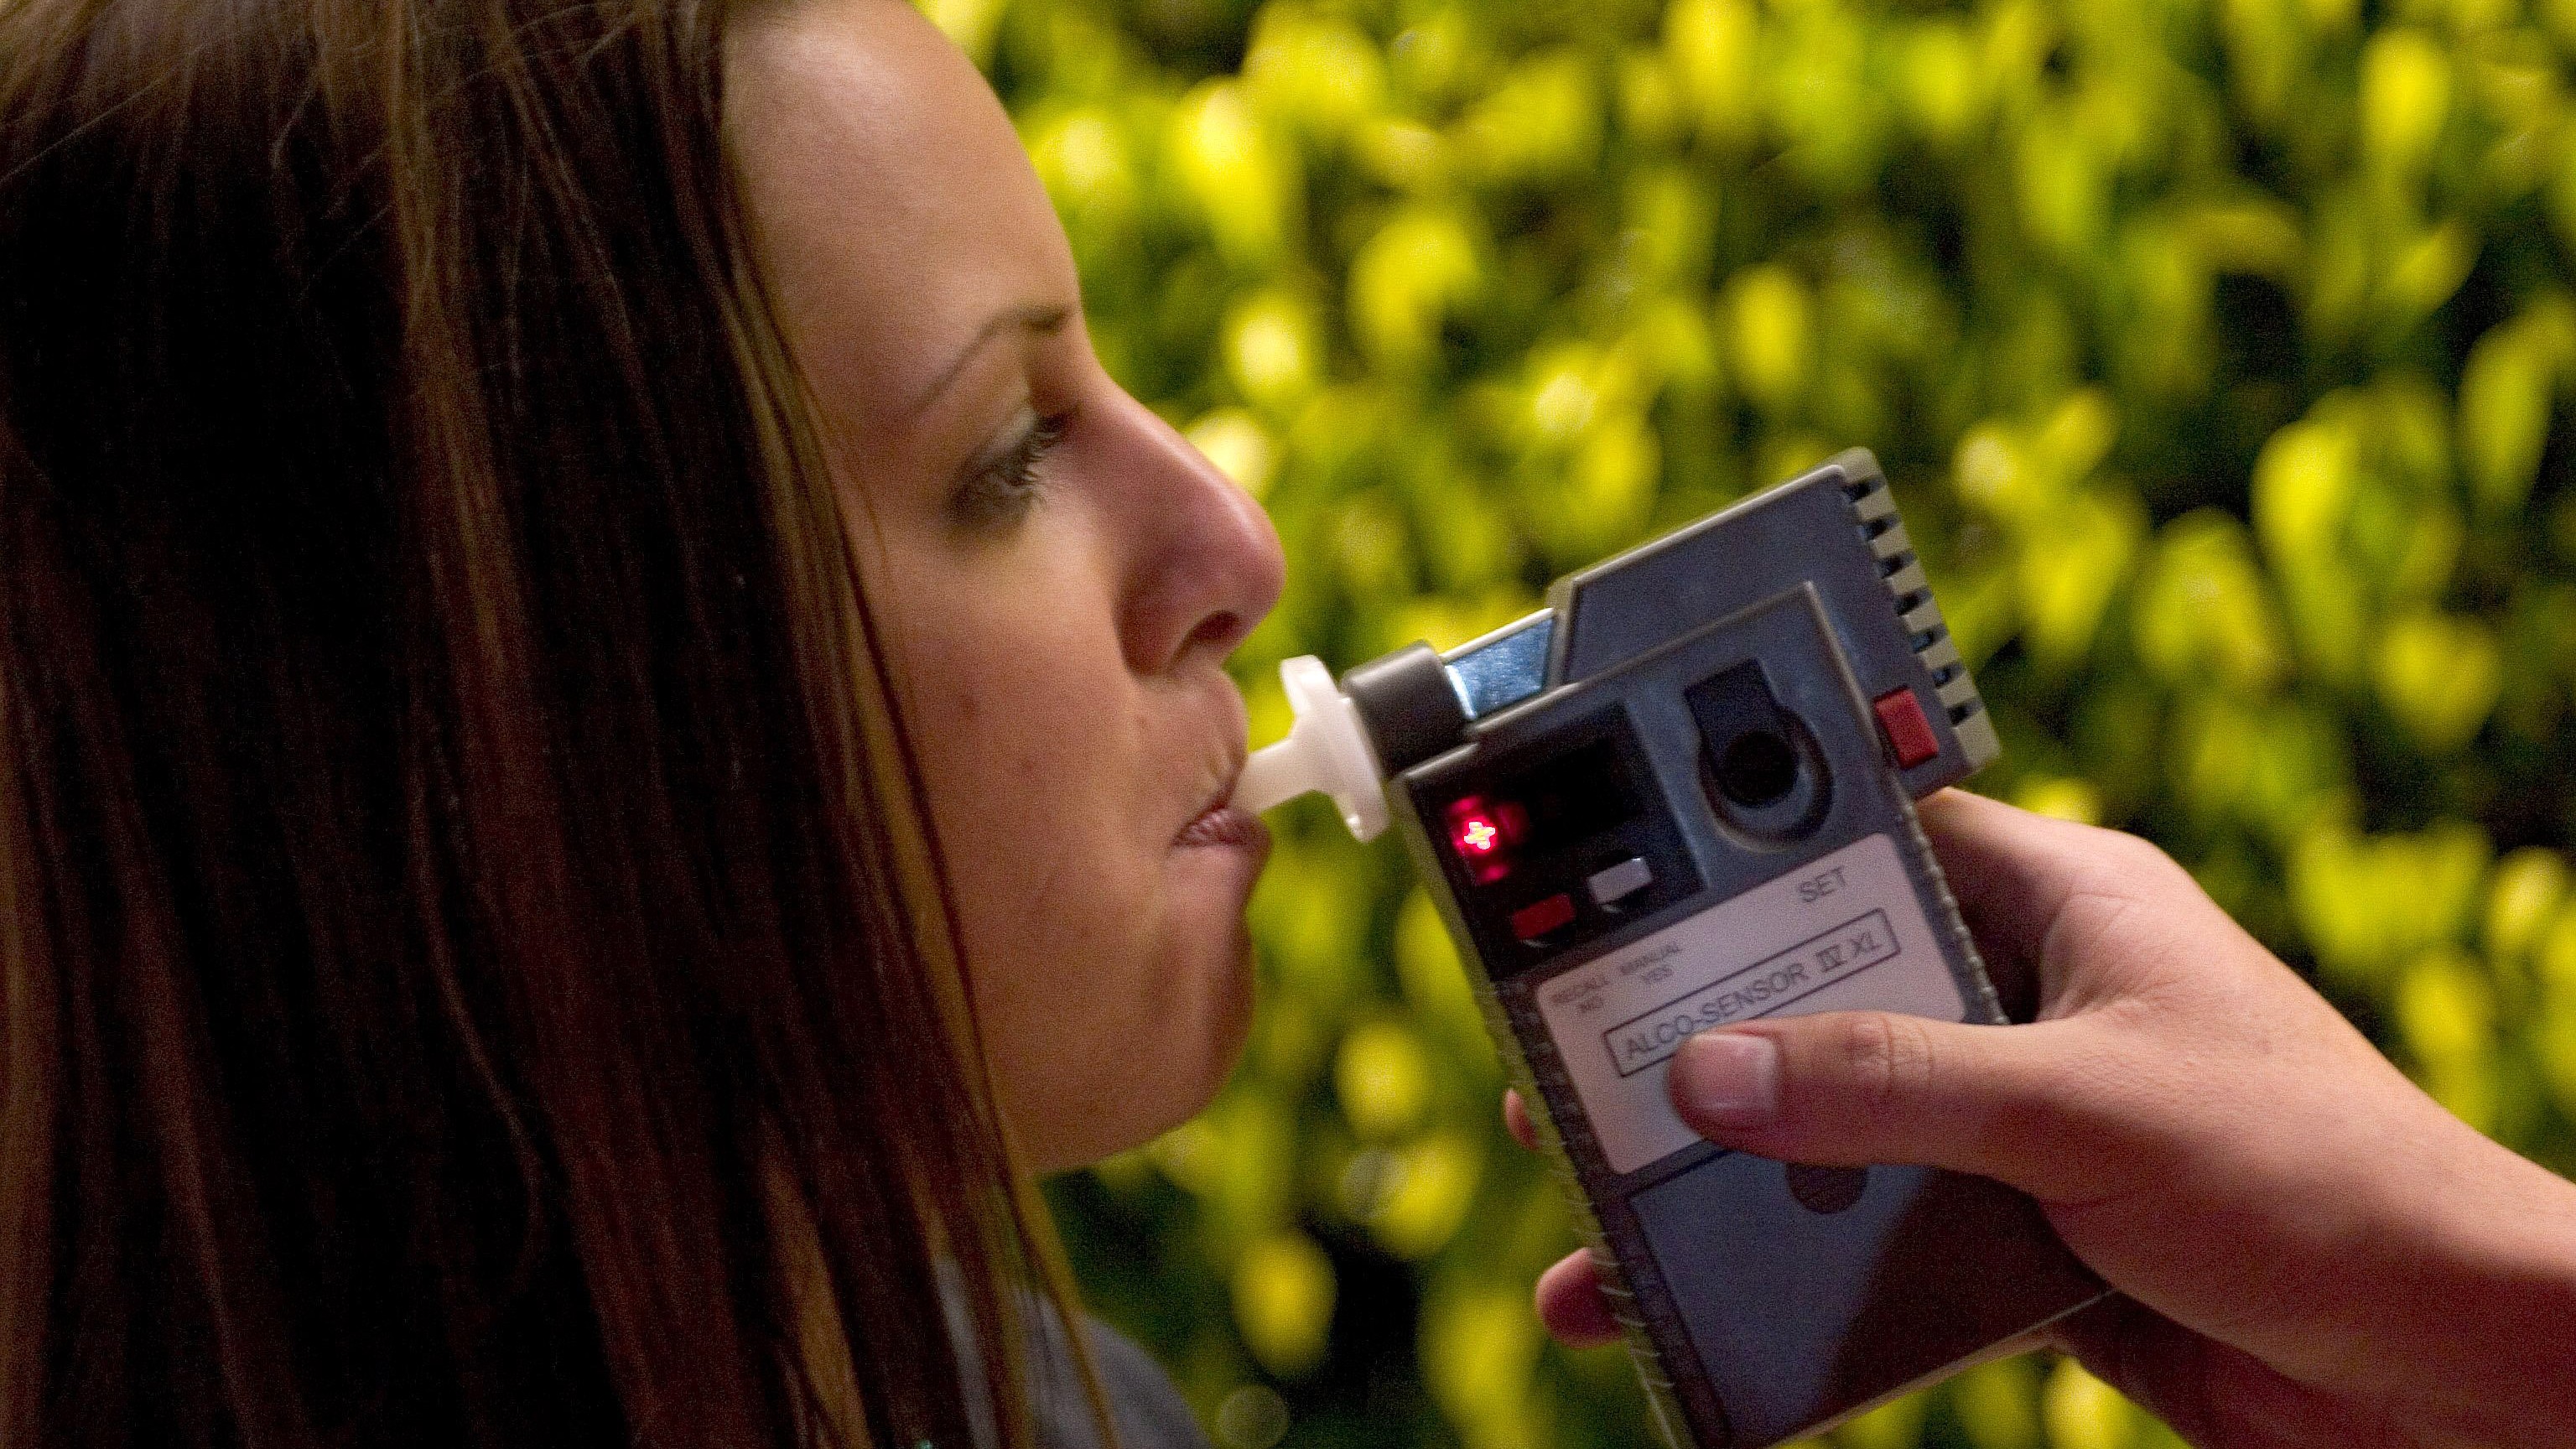 Kingston clubs have no plans to introduce breathalyser